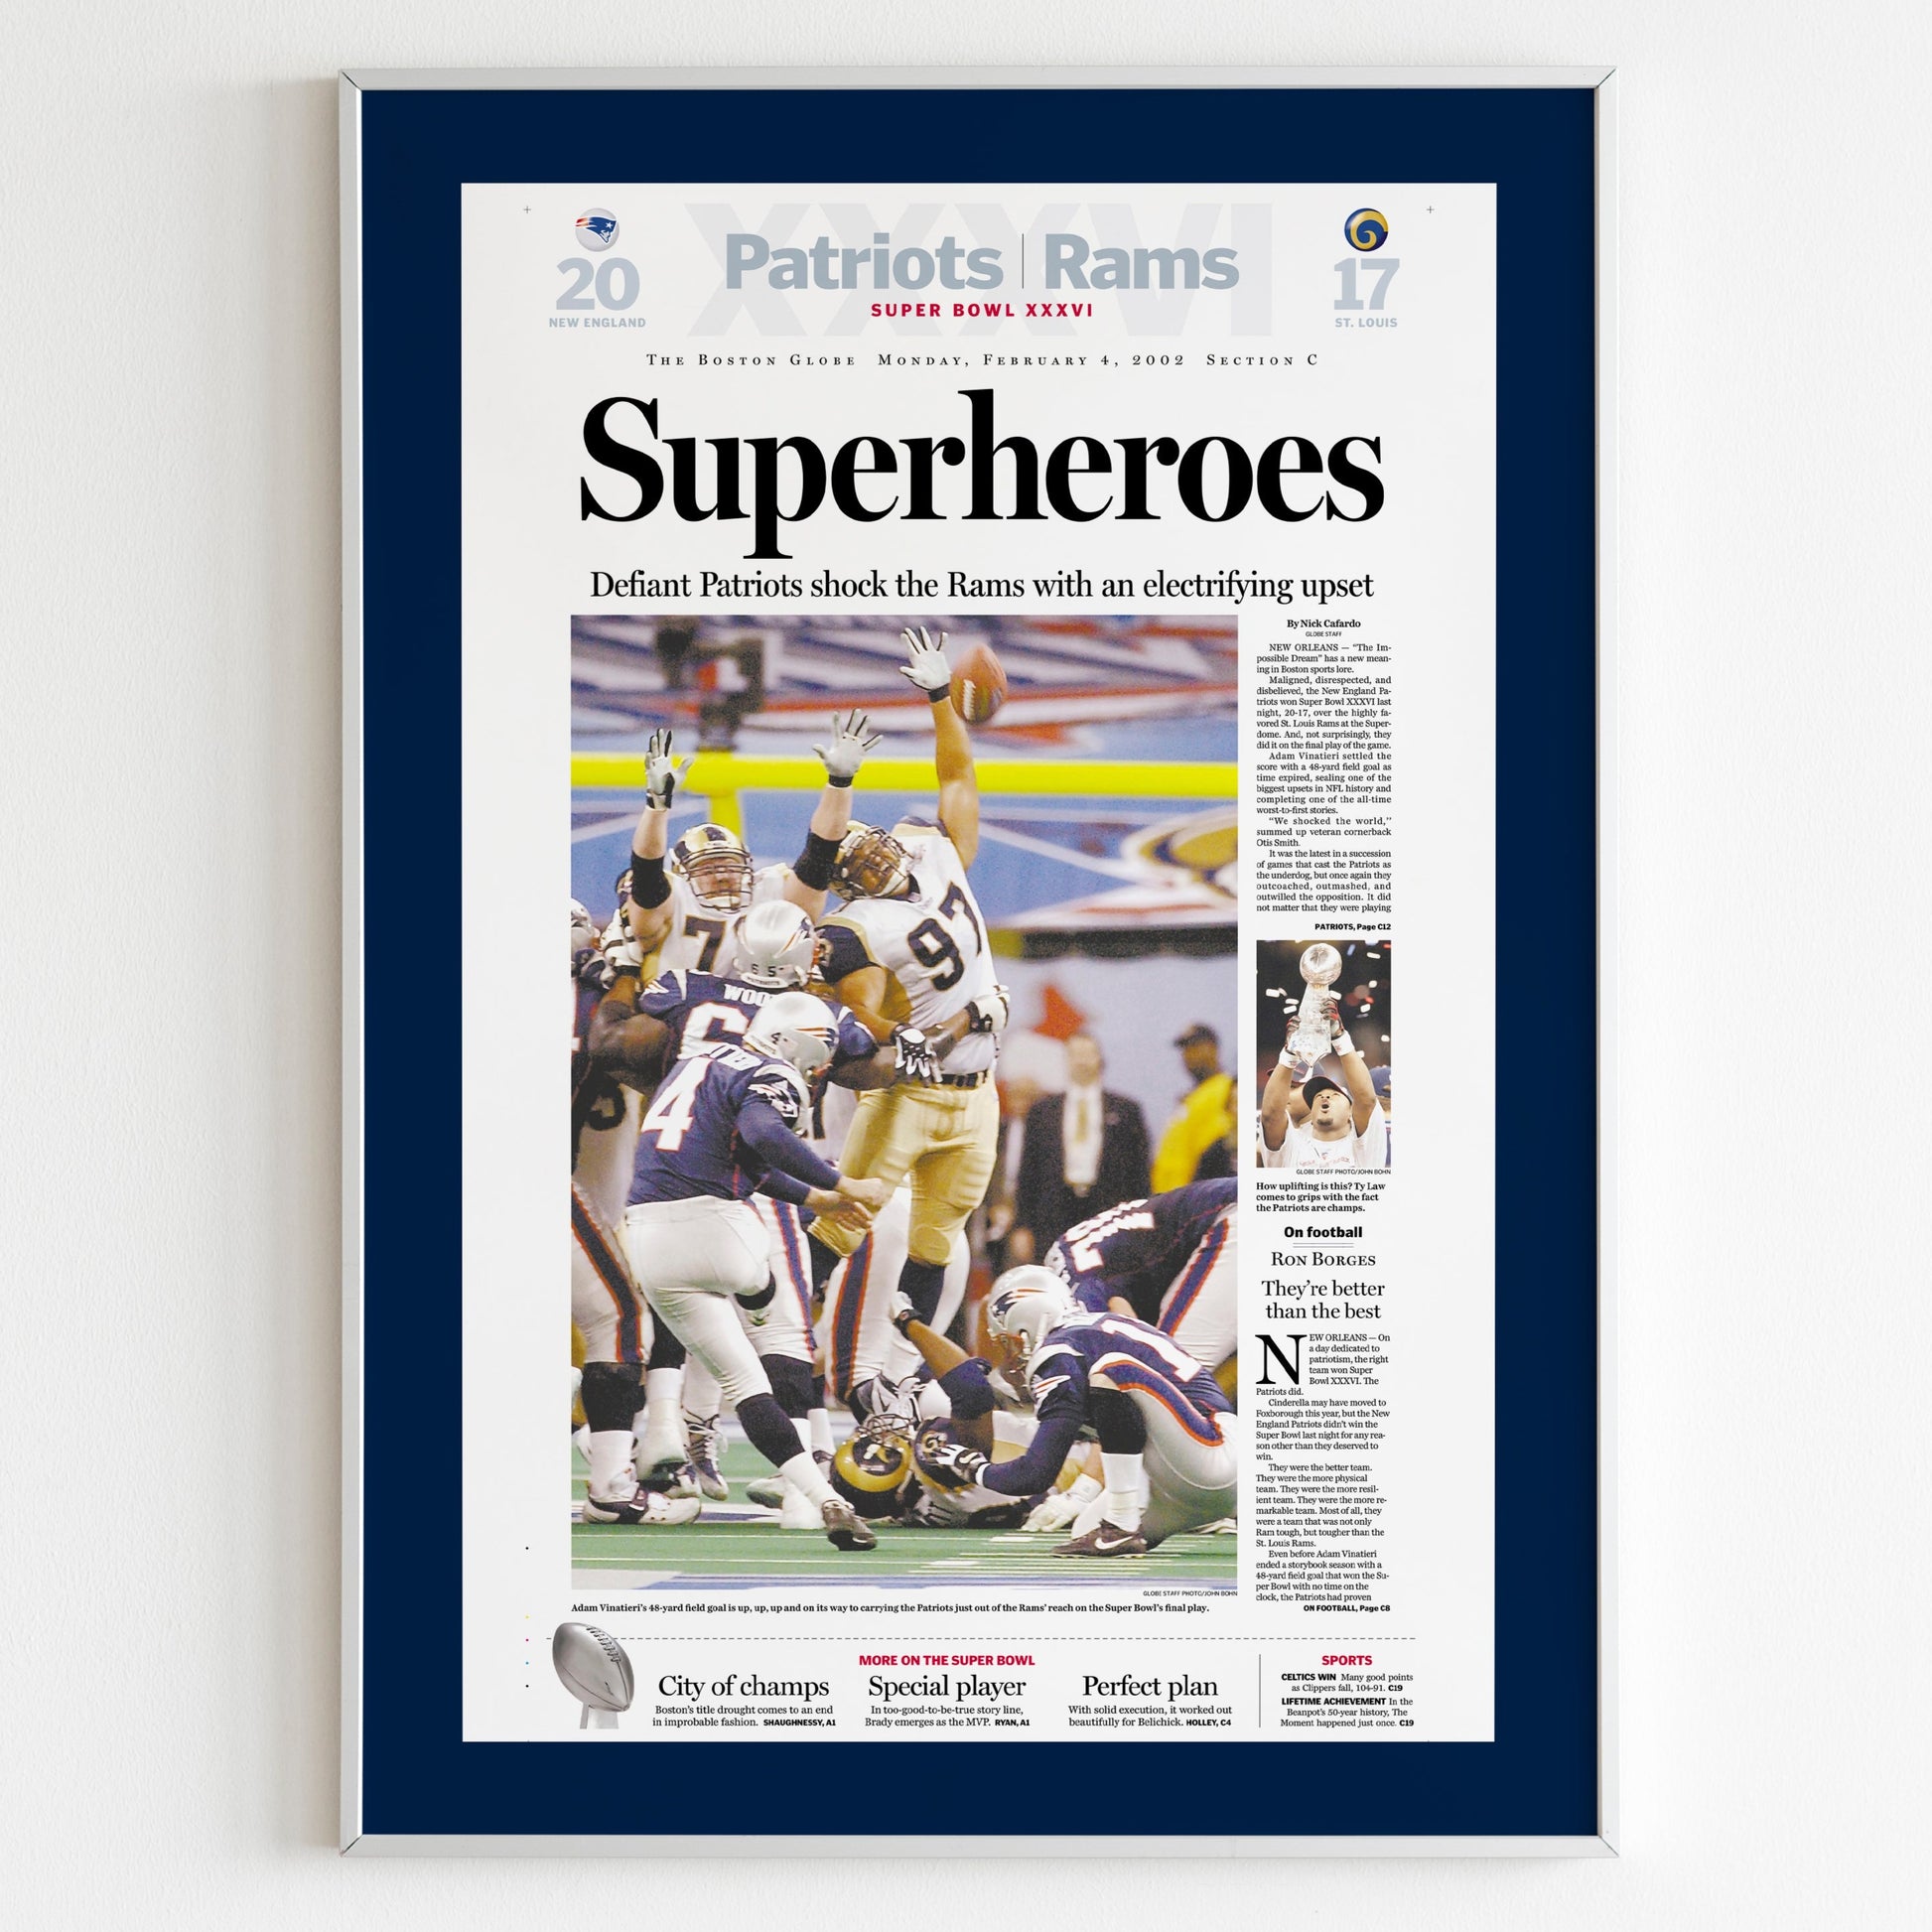 New England Patriots 2002 Super Bowl NFL Champions Front Cover The Boston Globe Newspaper Poster, Football Team Print, Magazine Page Poster